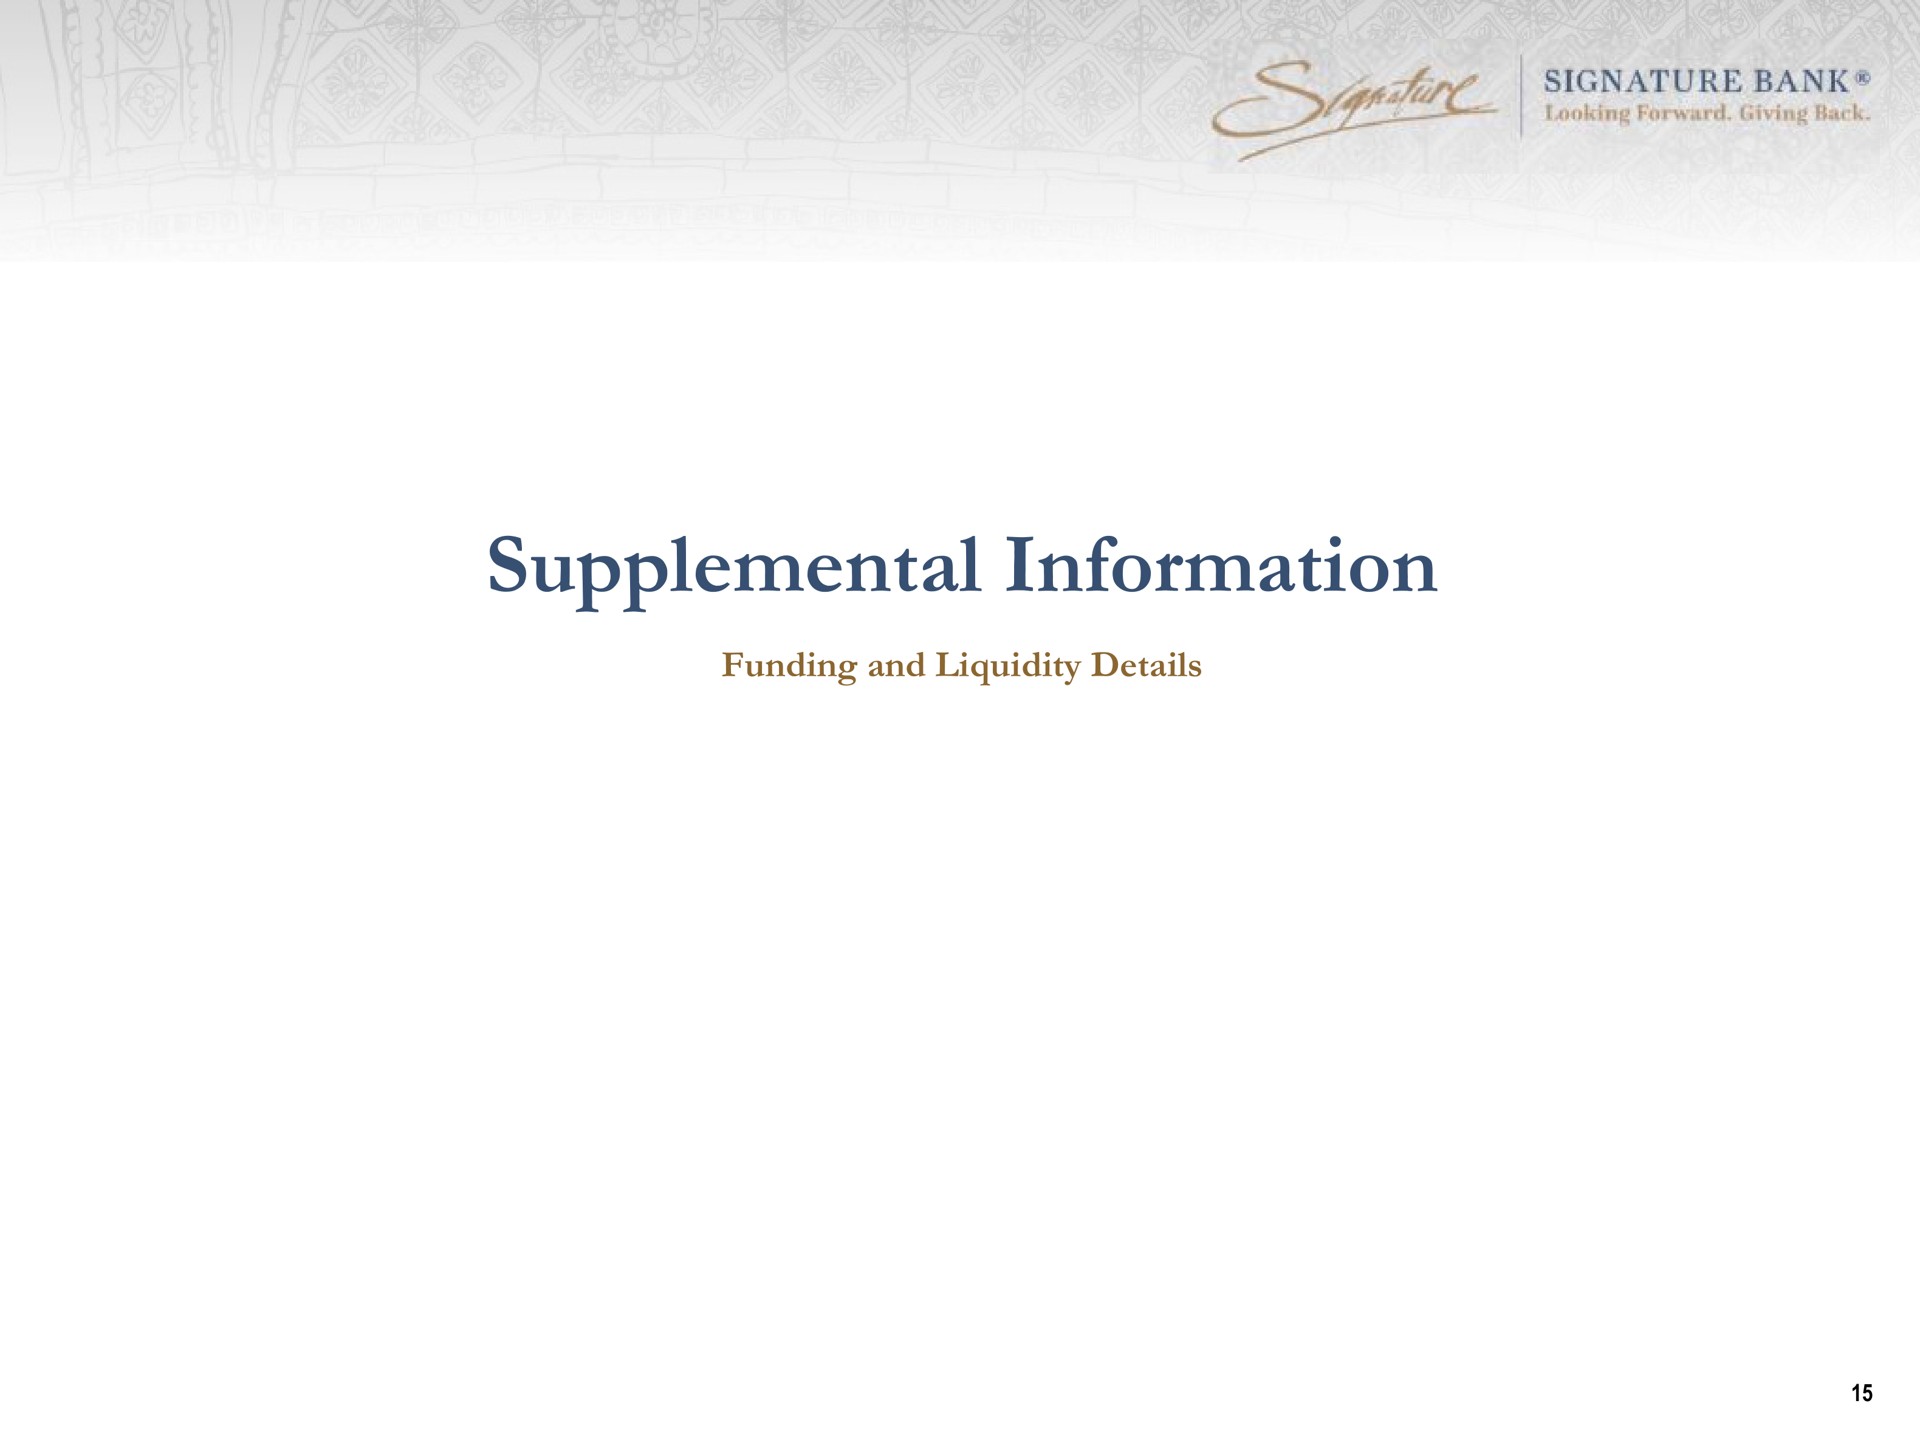 supplemental information mite is signature bank funding and liquidity details | Signature Bank